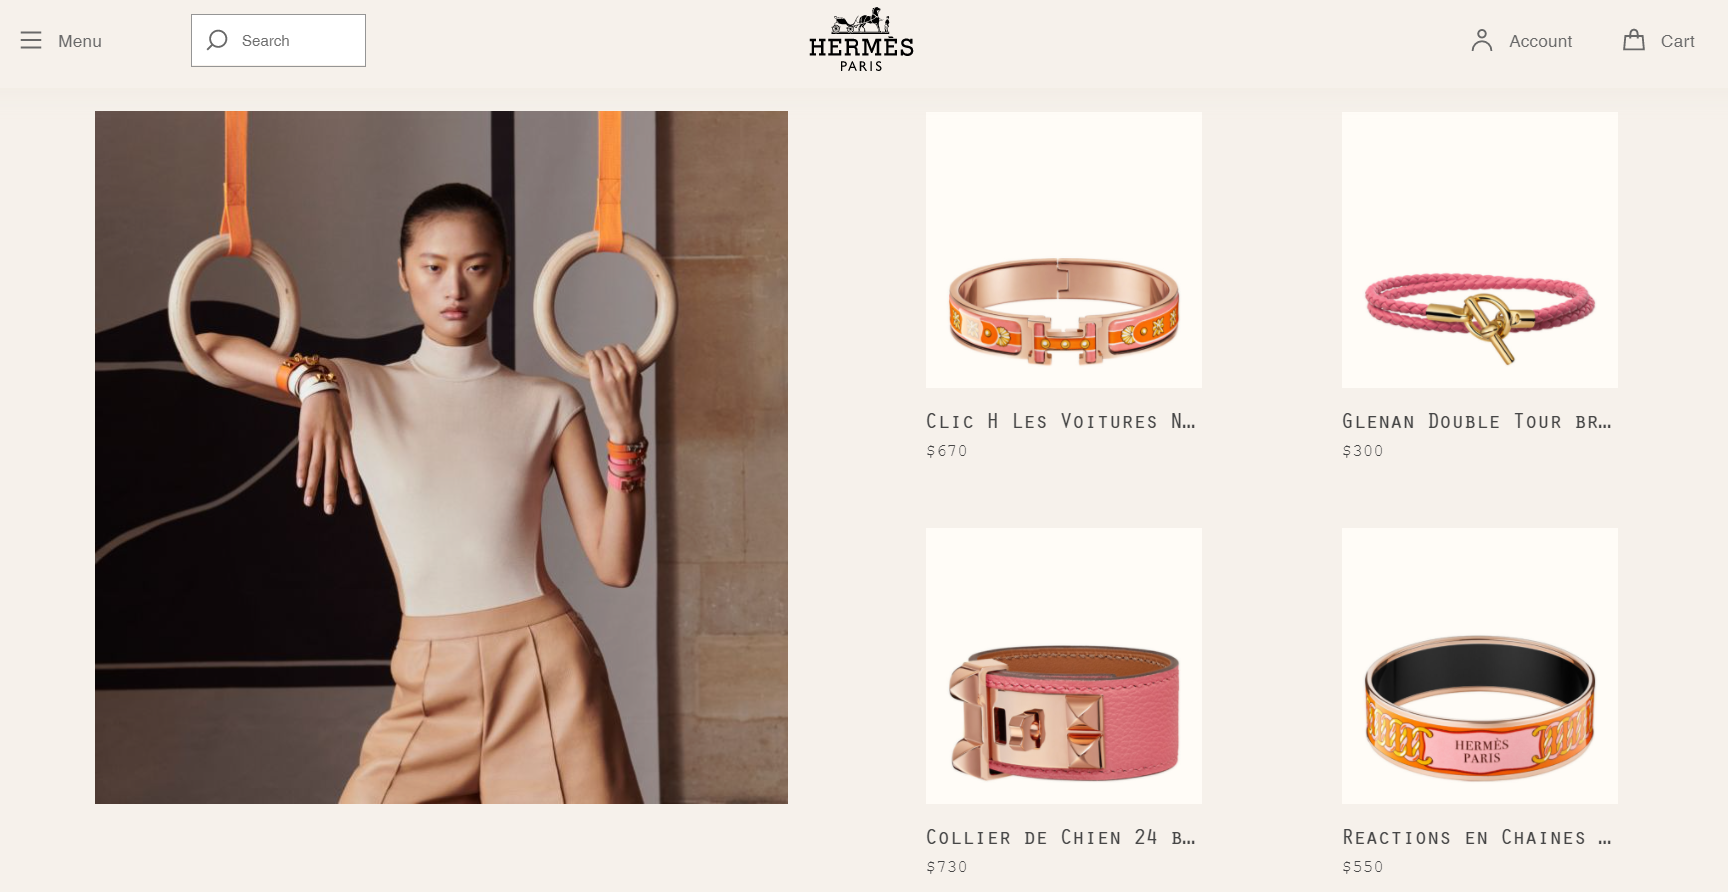 5 things you didn't know about Hermès' leather